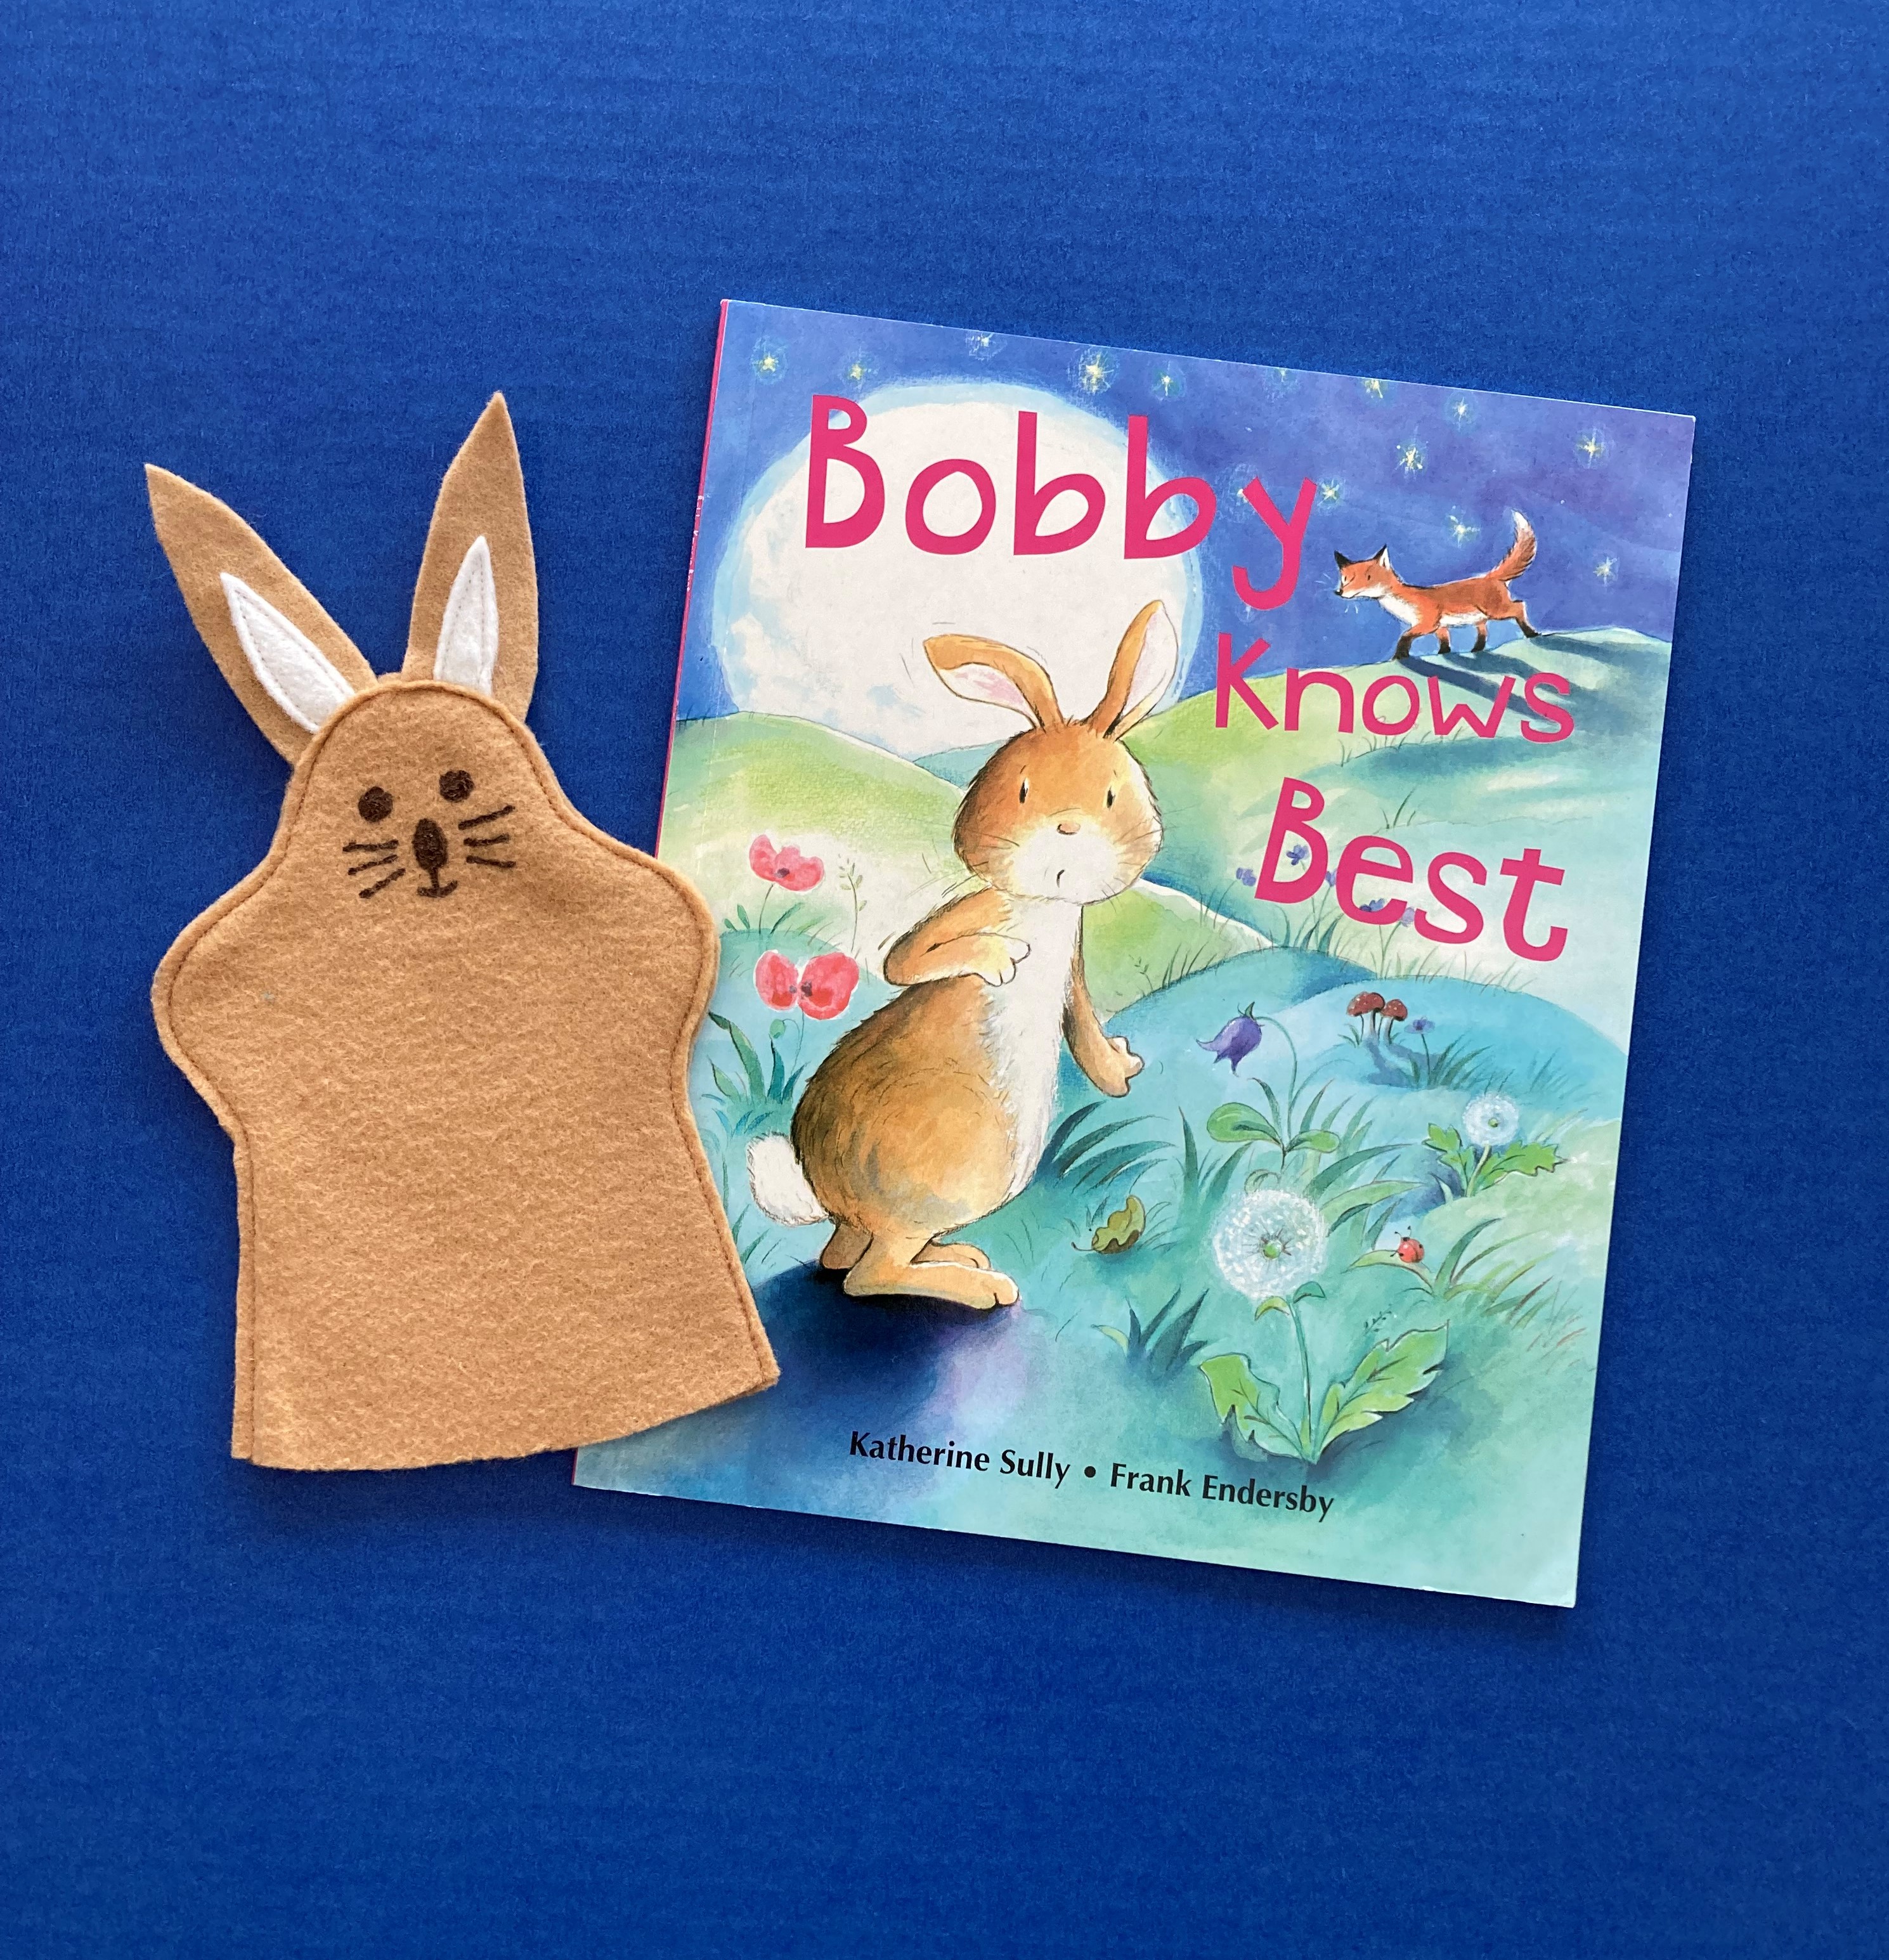 Tan rabbit felt puppet for toddlers with matching book Bobby Knows Best